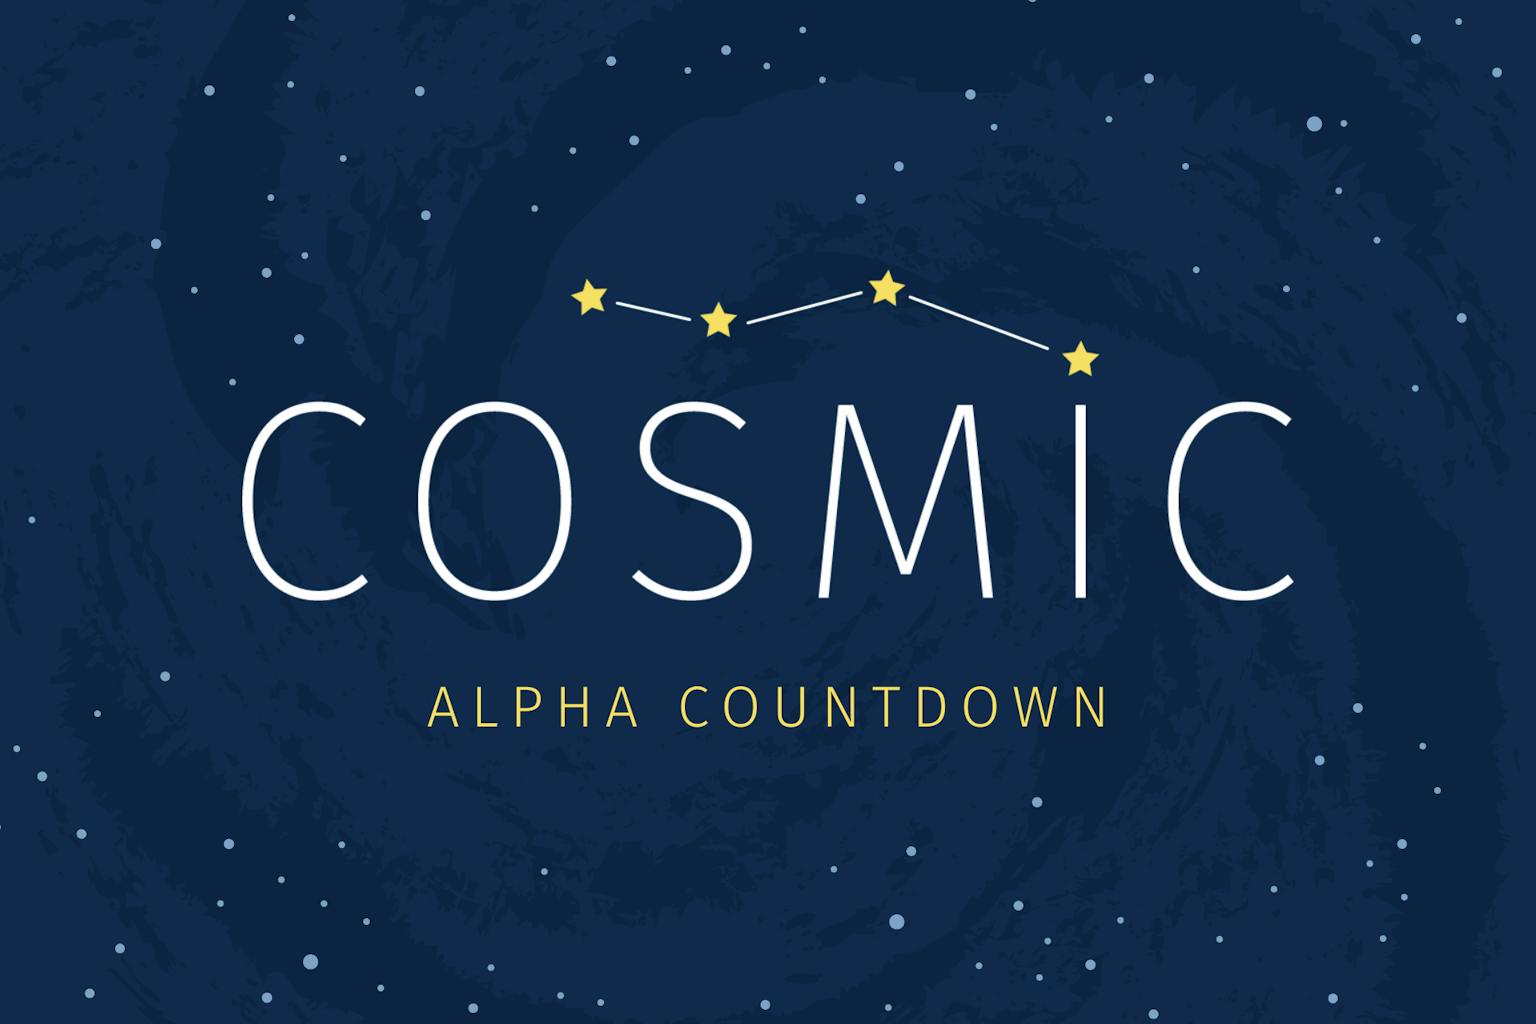 COSMIC: Alpha Countdown header with a galaxy swirl in the background.